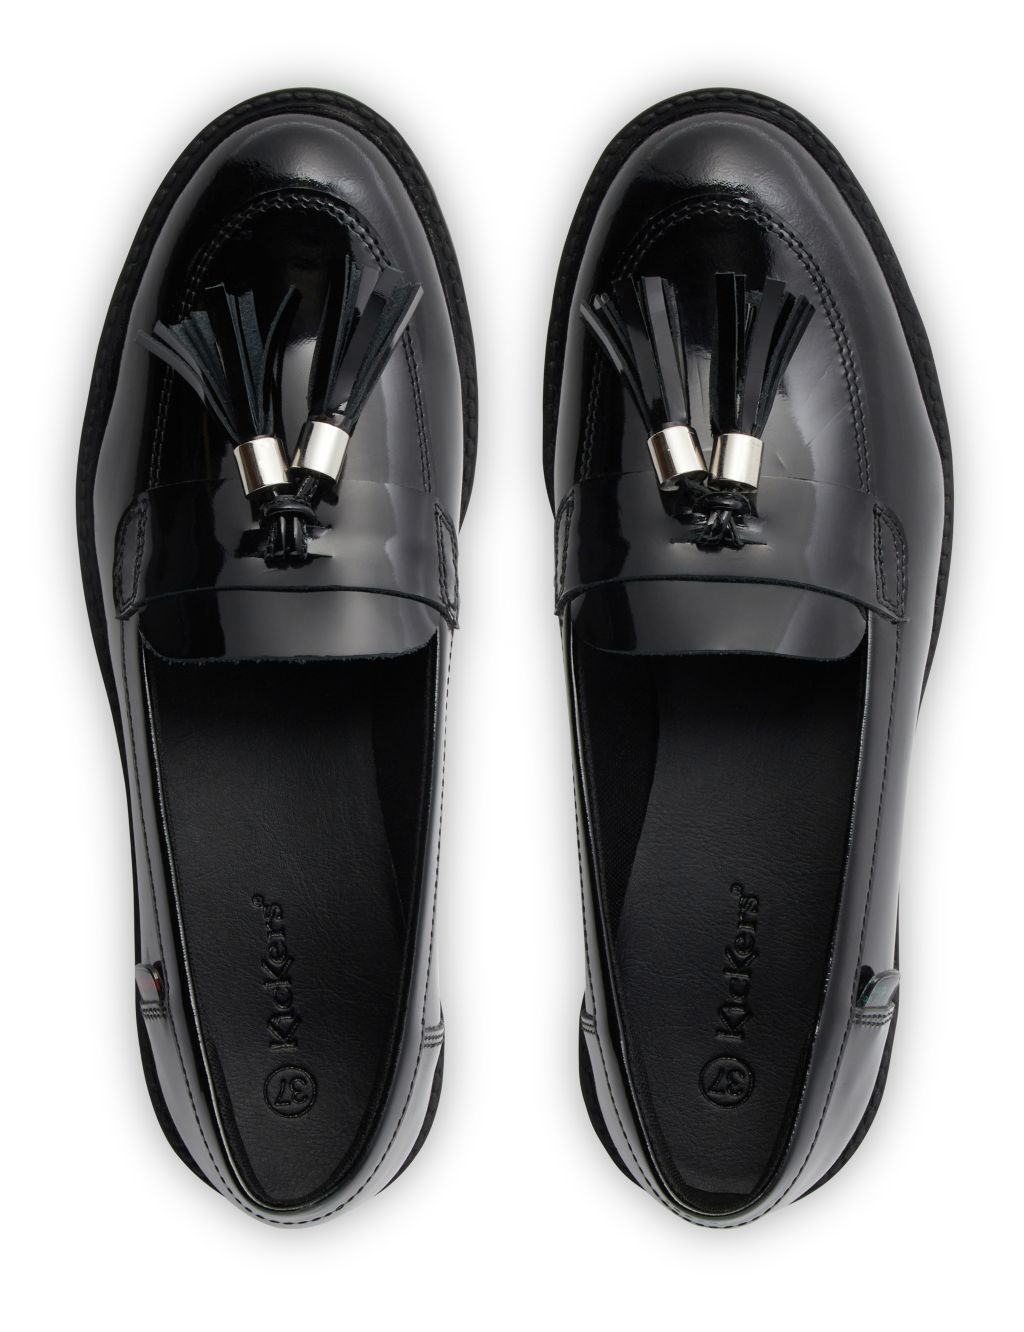 Leather Patent Tassel Loafers image 4